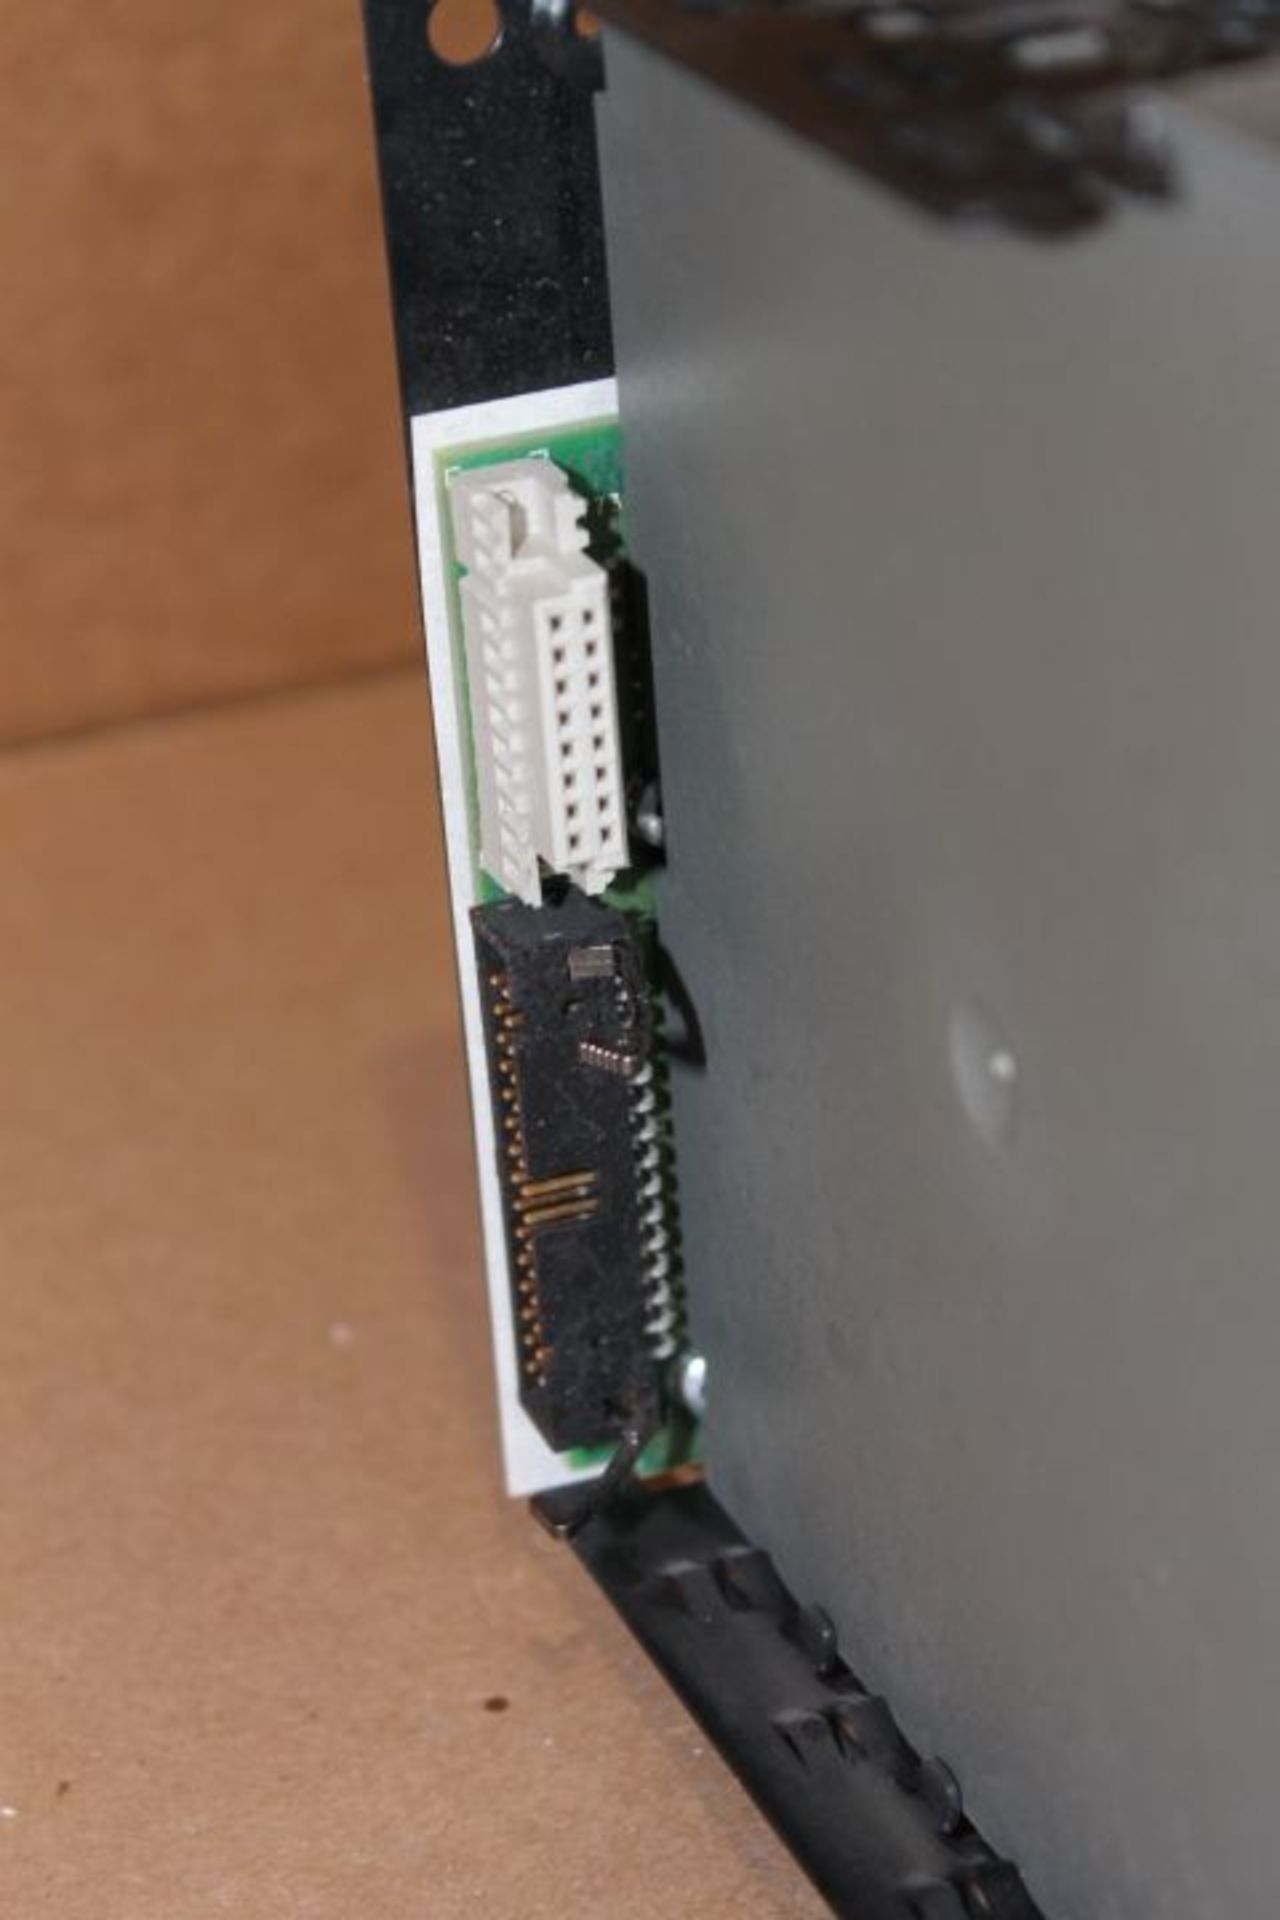 AB SLC 500 10-Slot Rack 1746-A10 with 3 Cards, 2 Scanner Cards and 1 DeviceNet Card - Image 3 of 4